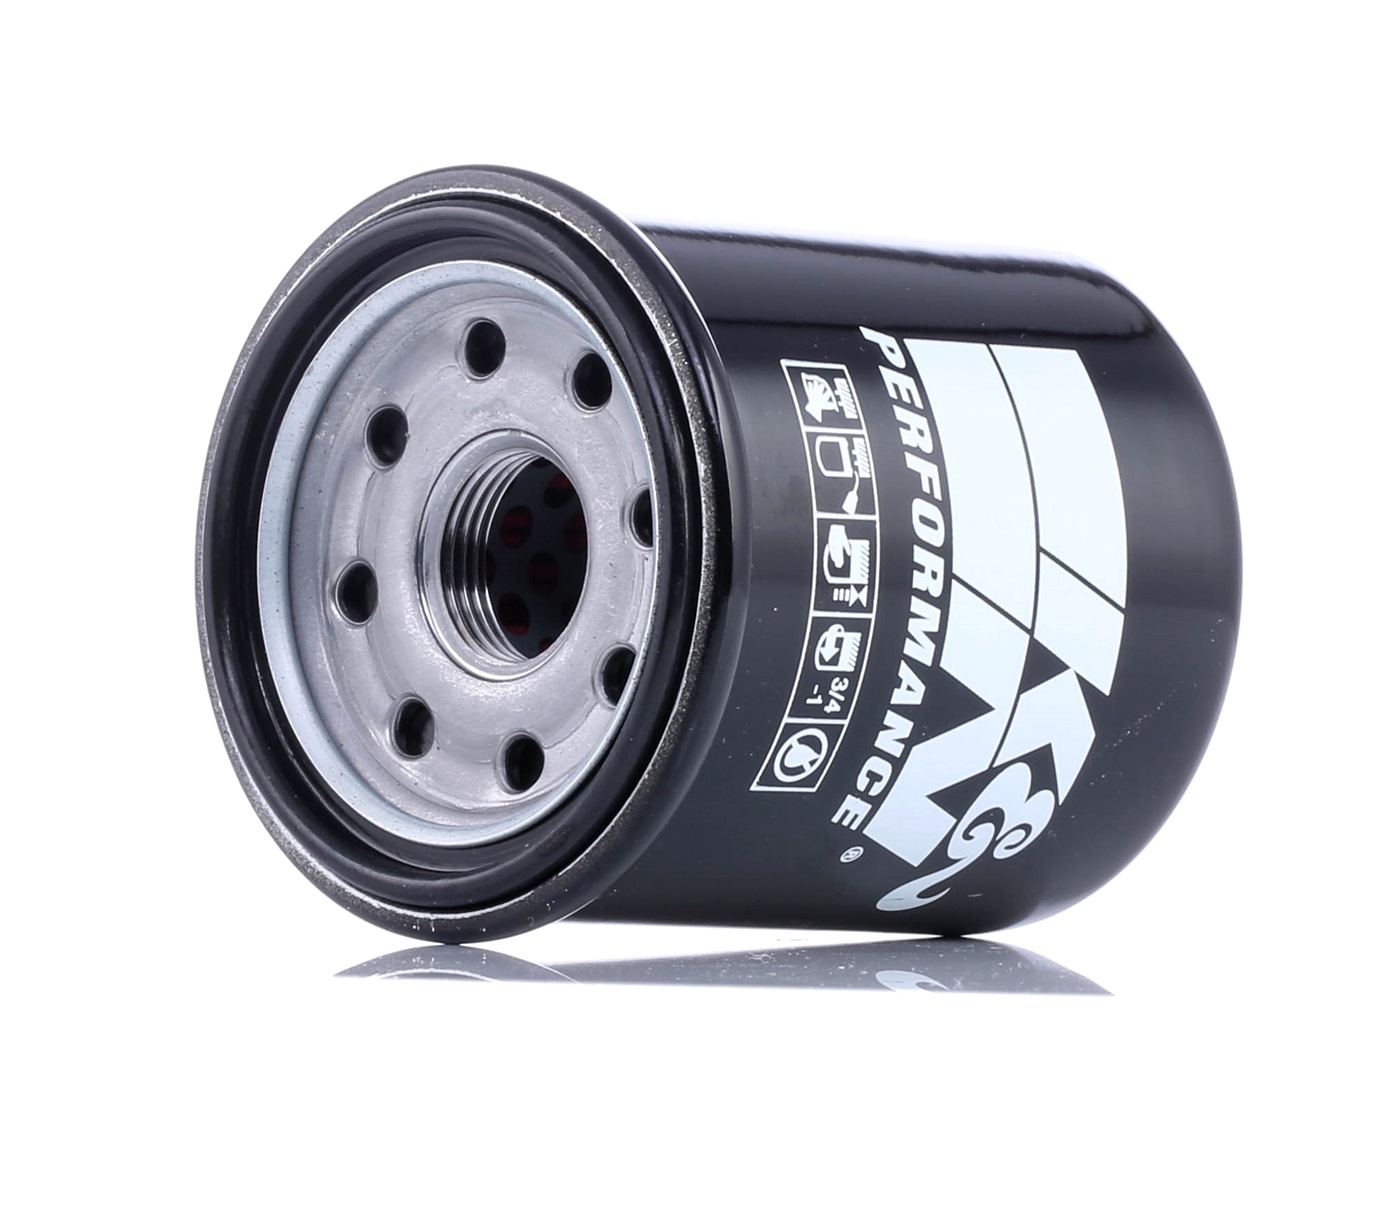 Oliefilter K&N Filters KN-303 YZF-R Motorfiets Brommer Maxiscooter